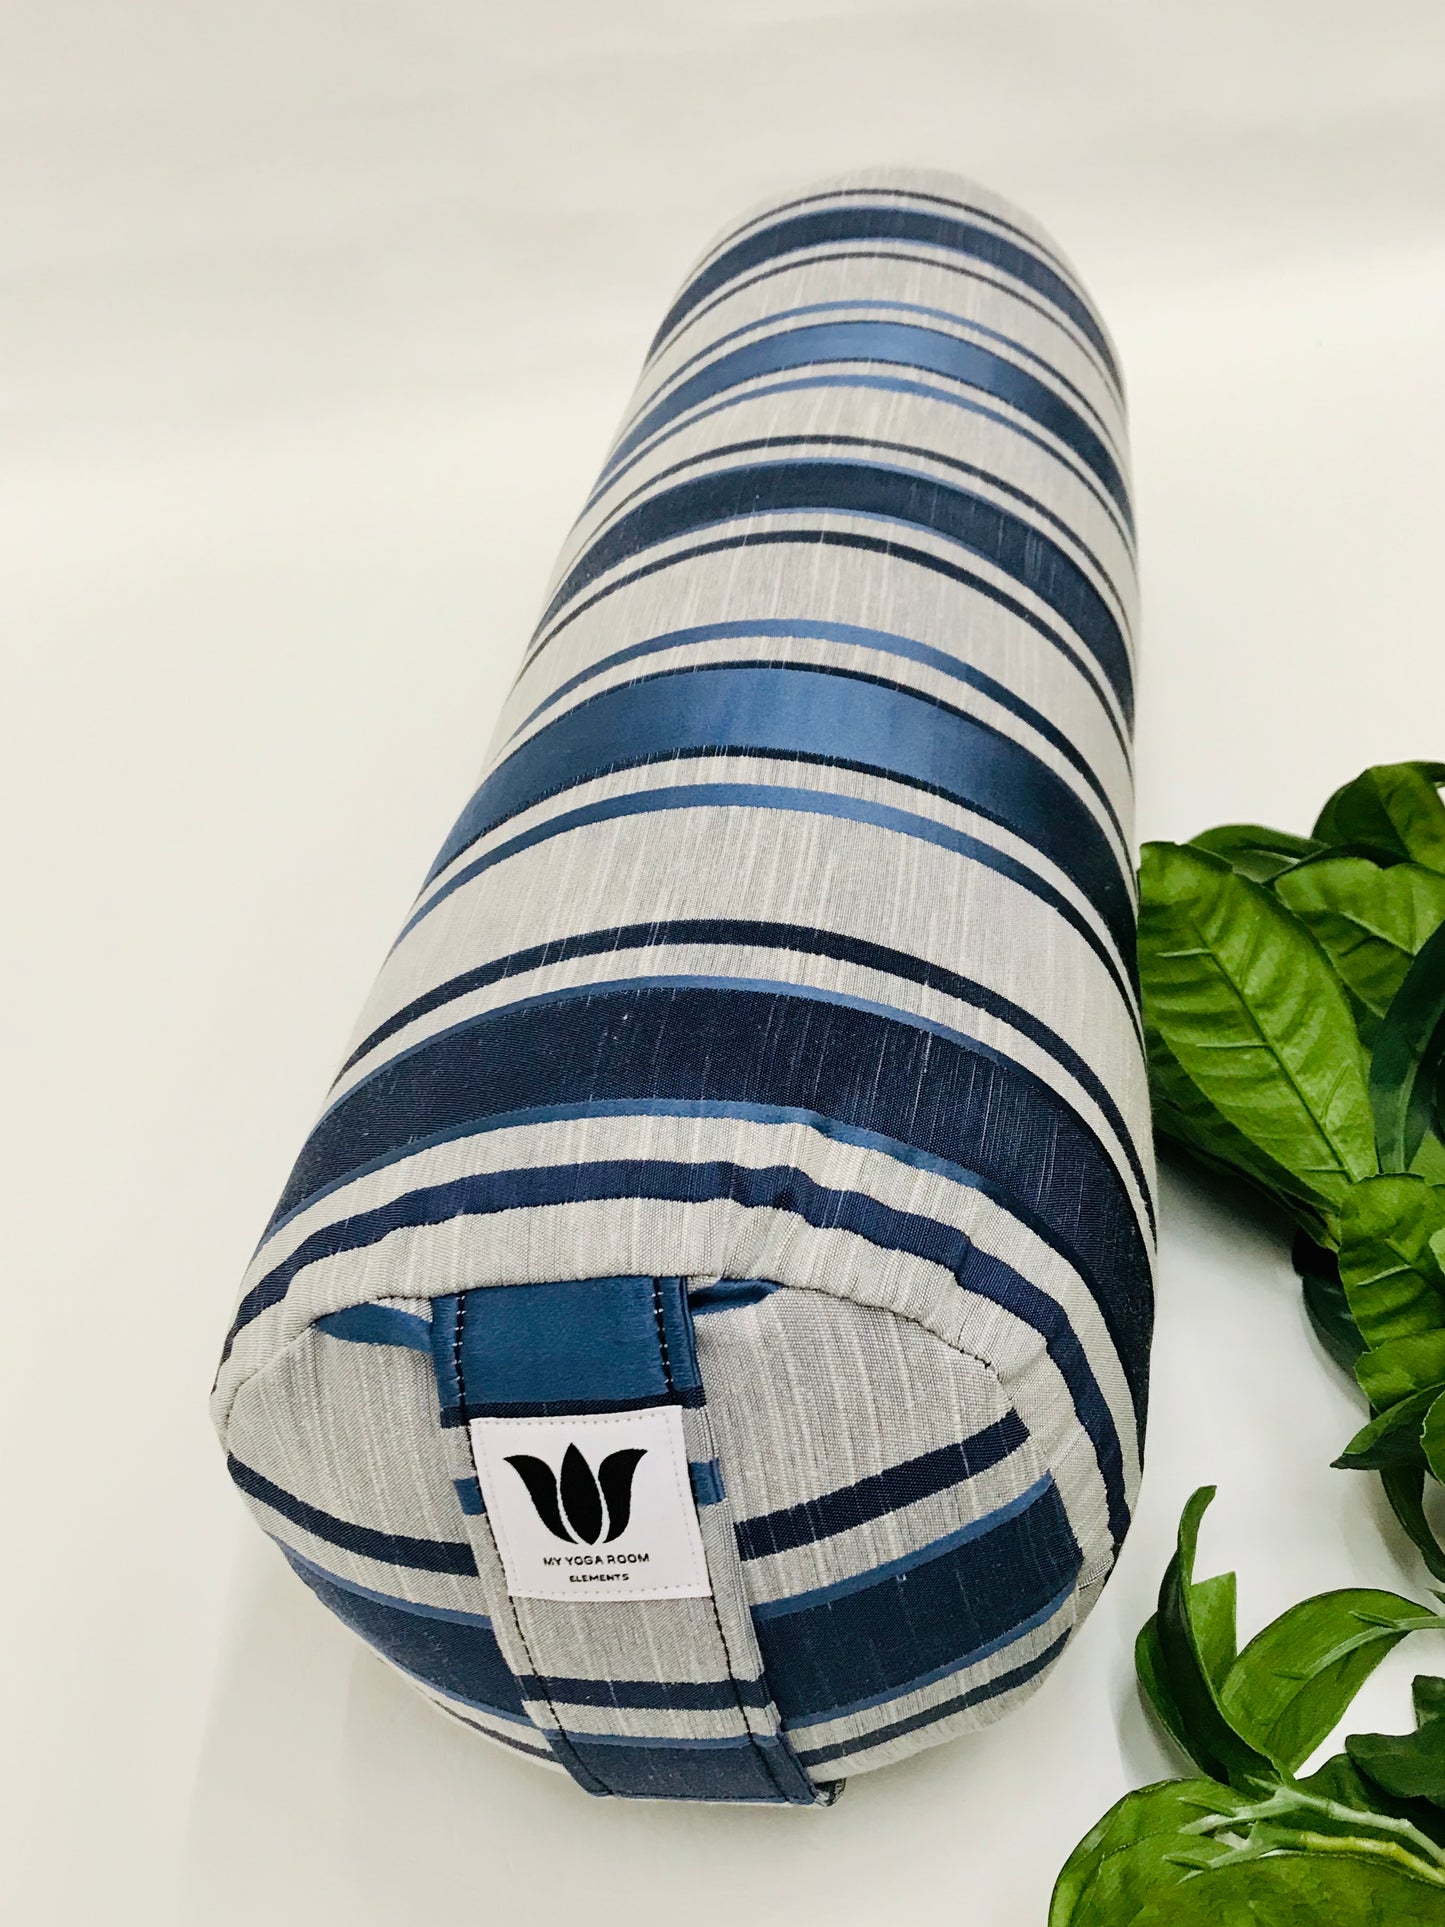 Round yoga bolster in blue and grey strip print fabric. Allergy conscious fill with removeable cover. Made in Canada by My Yoga Room Elements